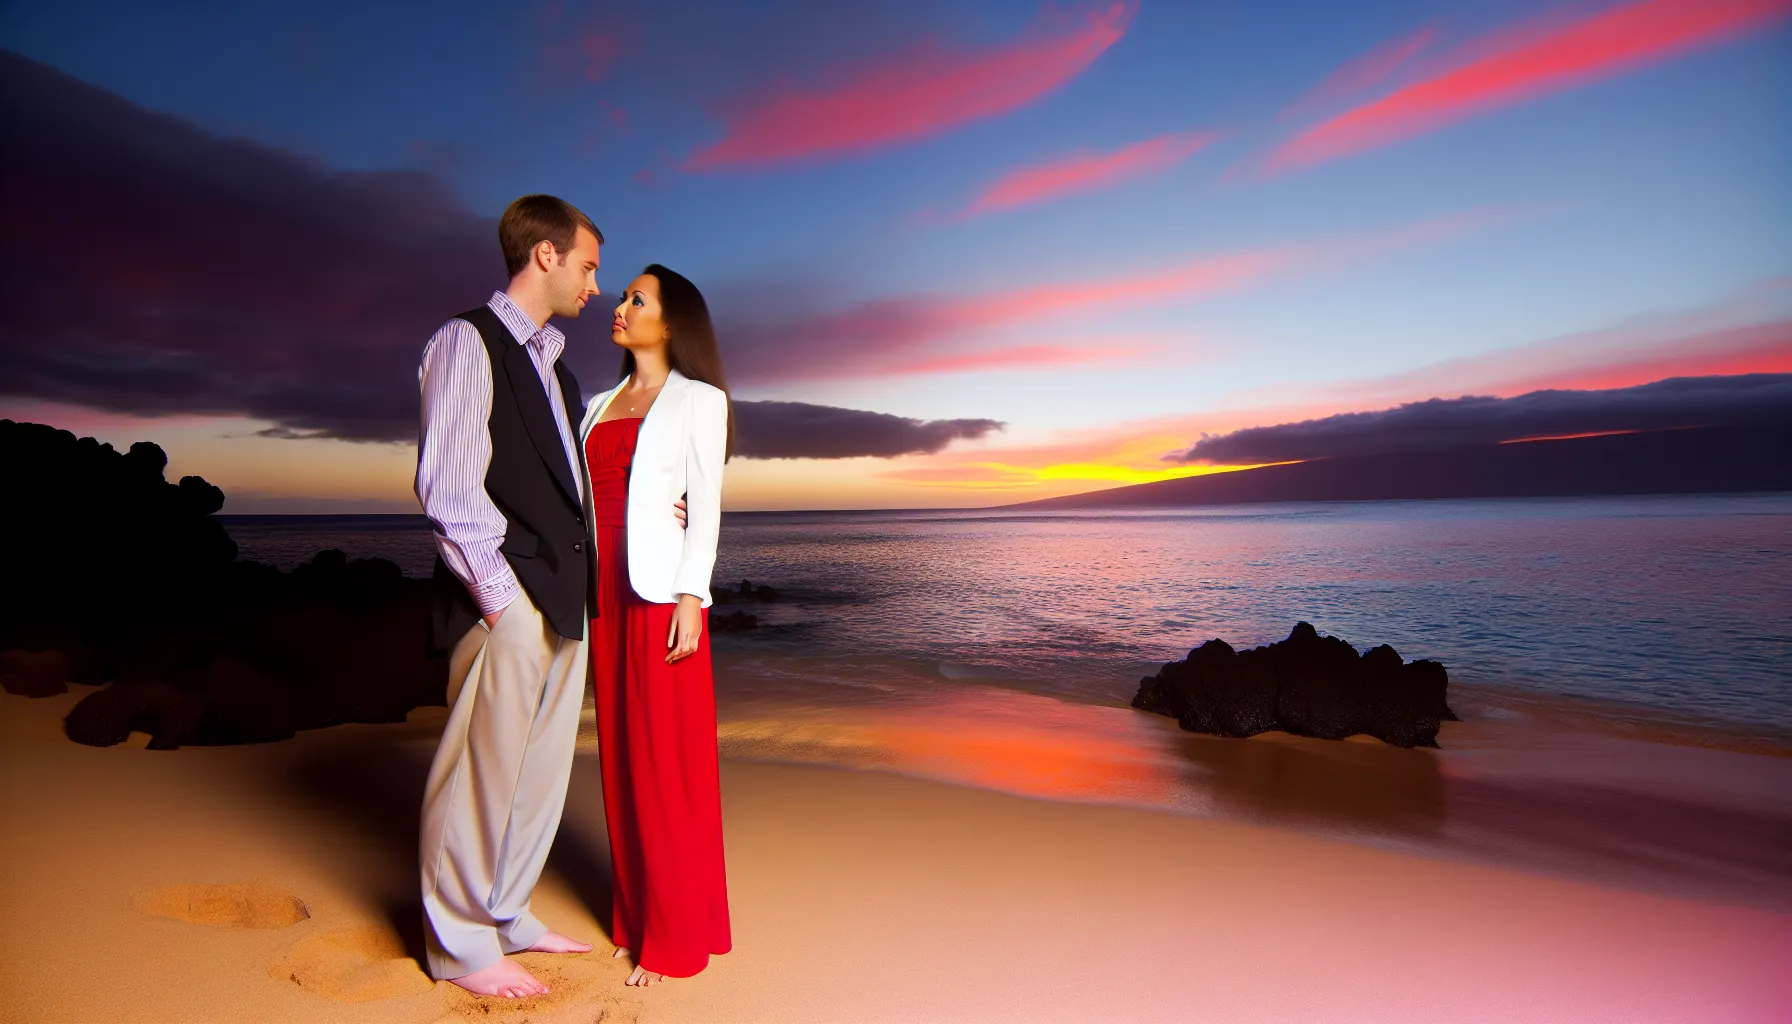 Couple enjoying sunset on a secluded beach in Lanai, Hawaii with vibrant sky hues